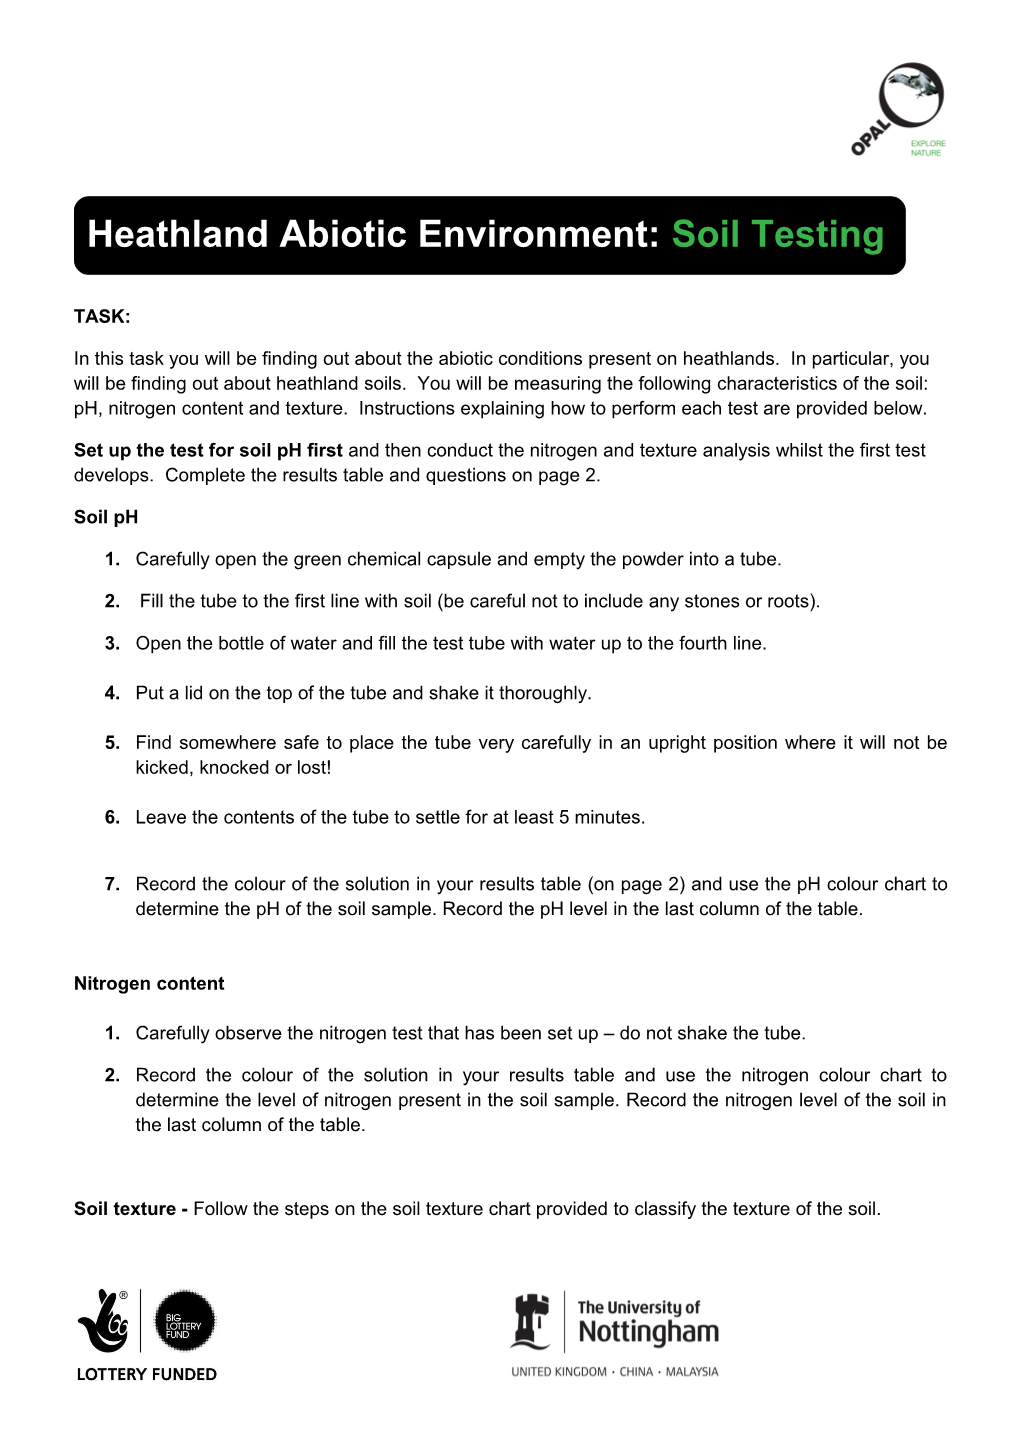 In This Task You Will Be Finding out About the Abiotic Conditions Present on Heathlands